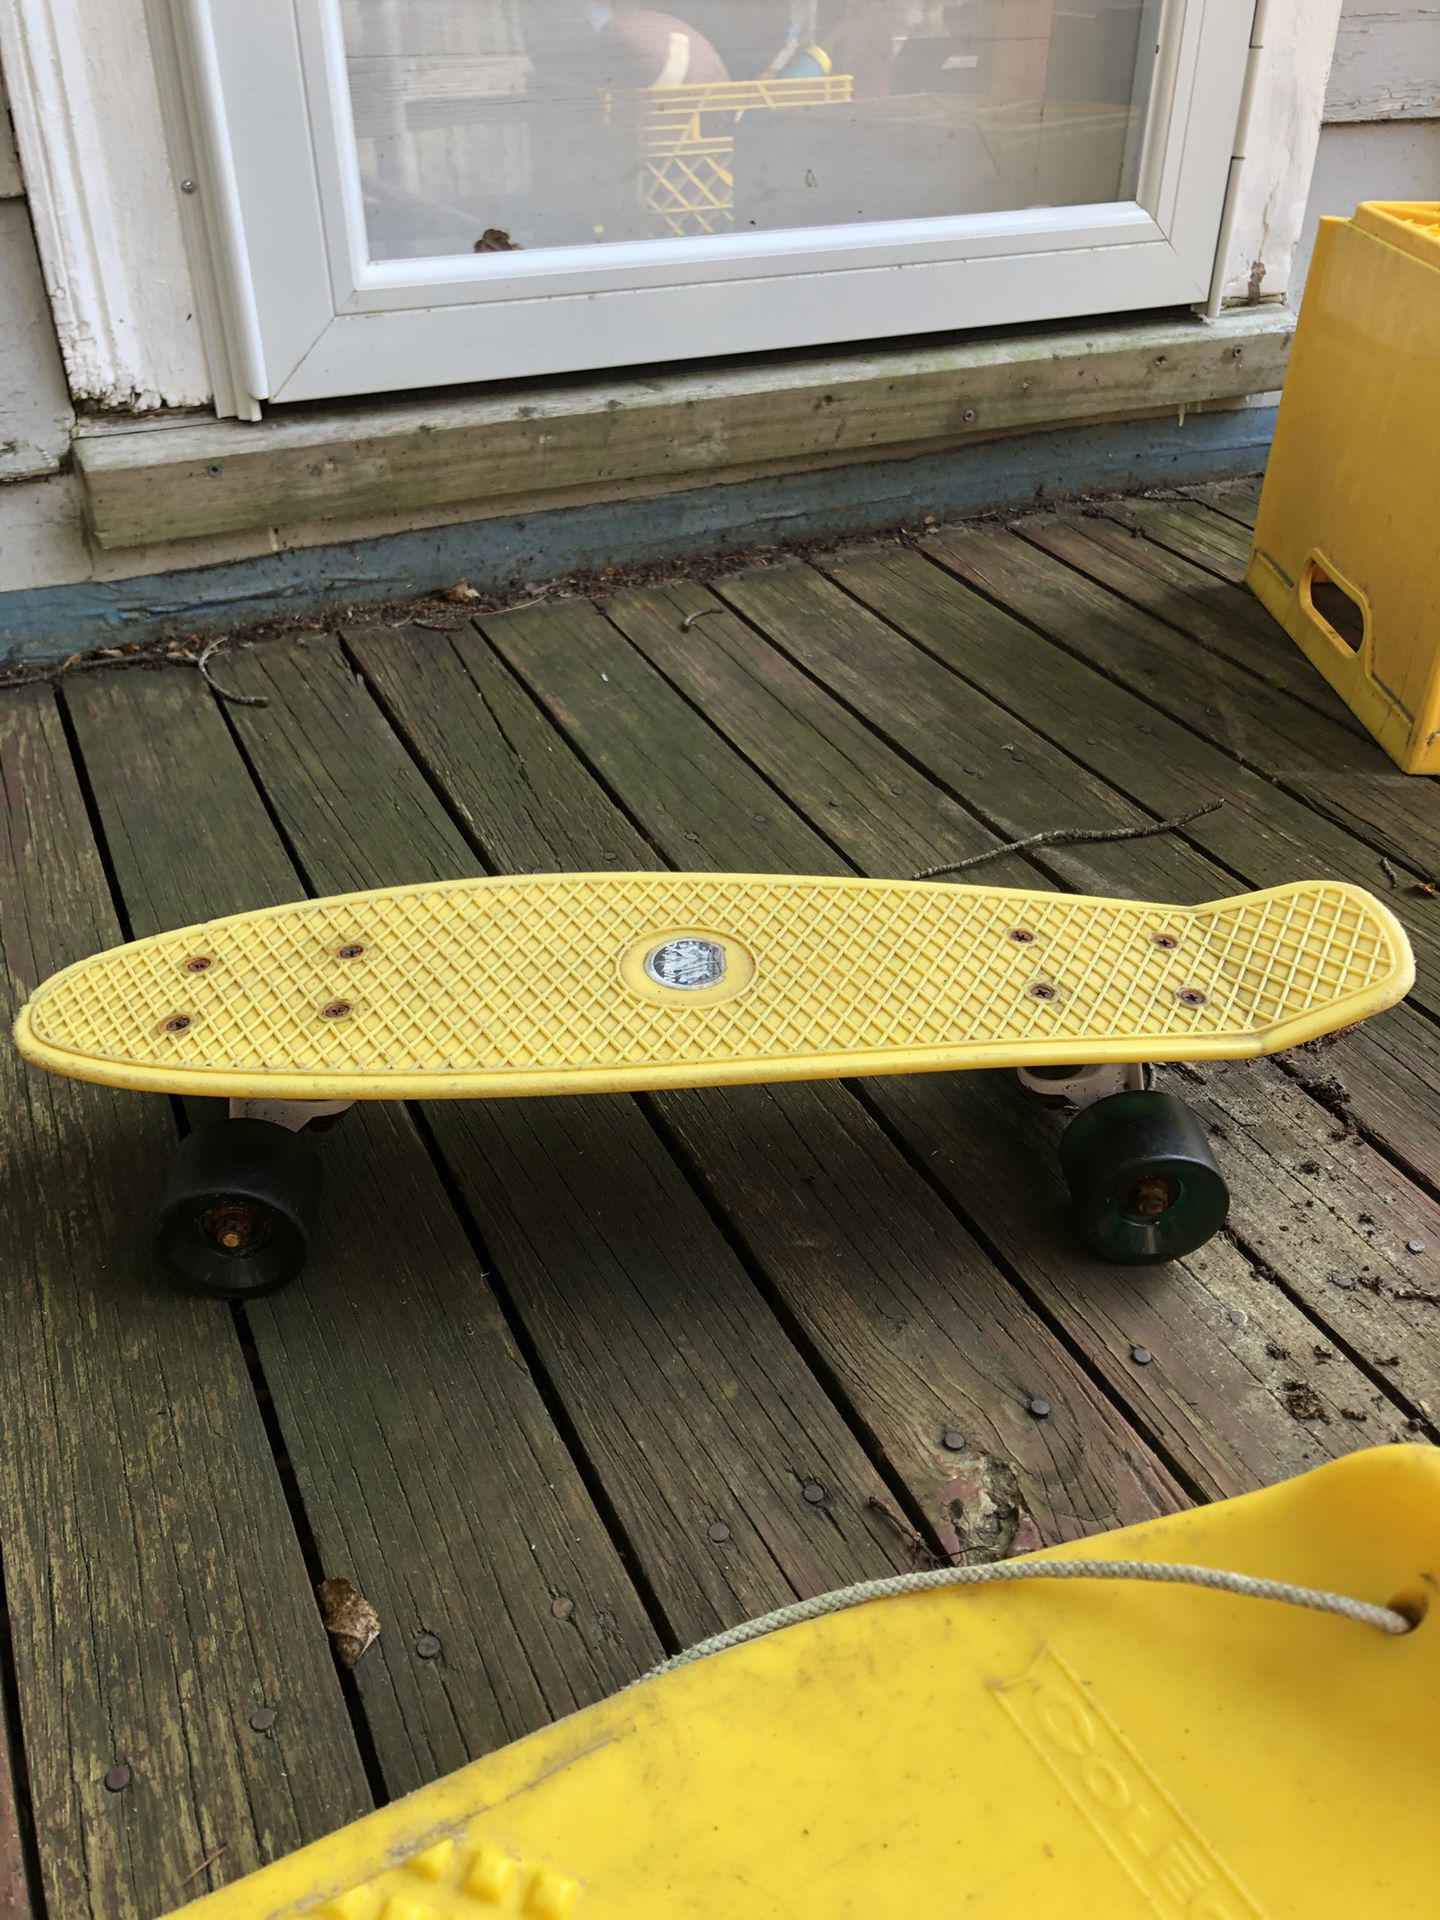 Skate board excellent condition from Thuro in Brookline